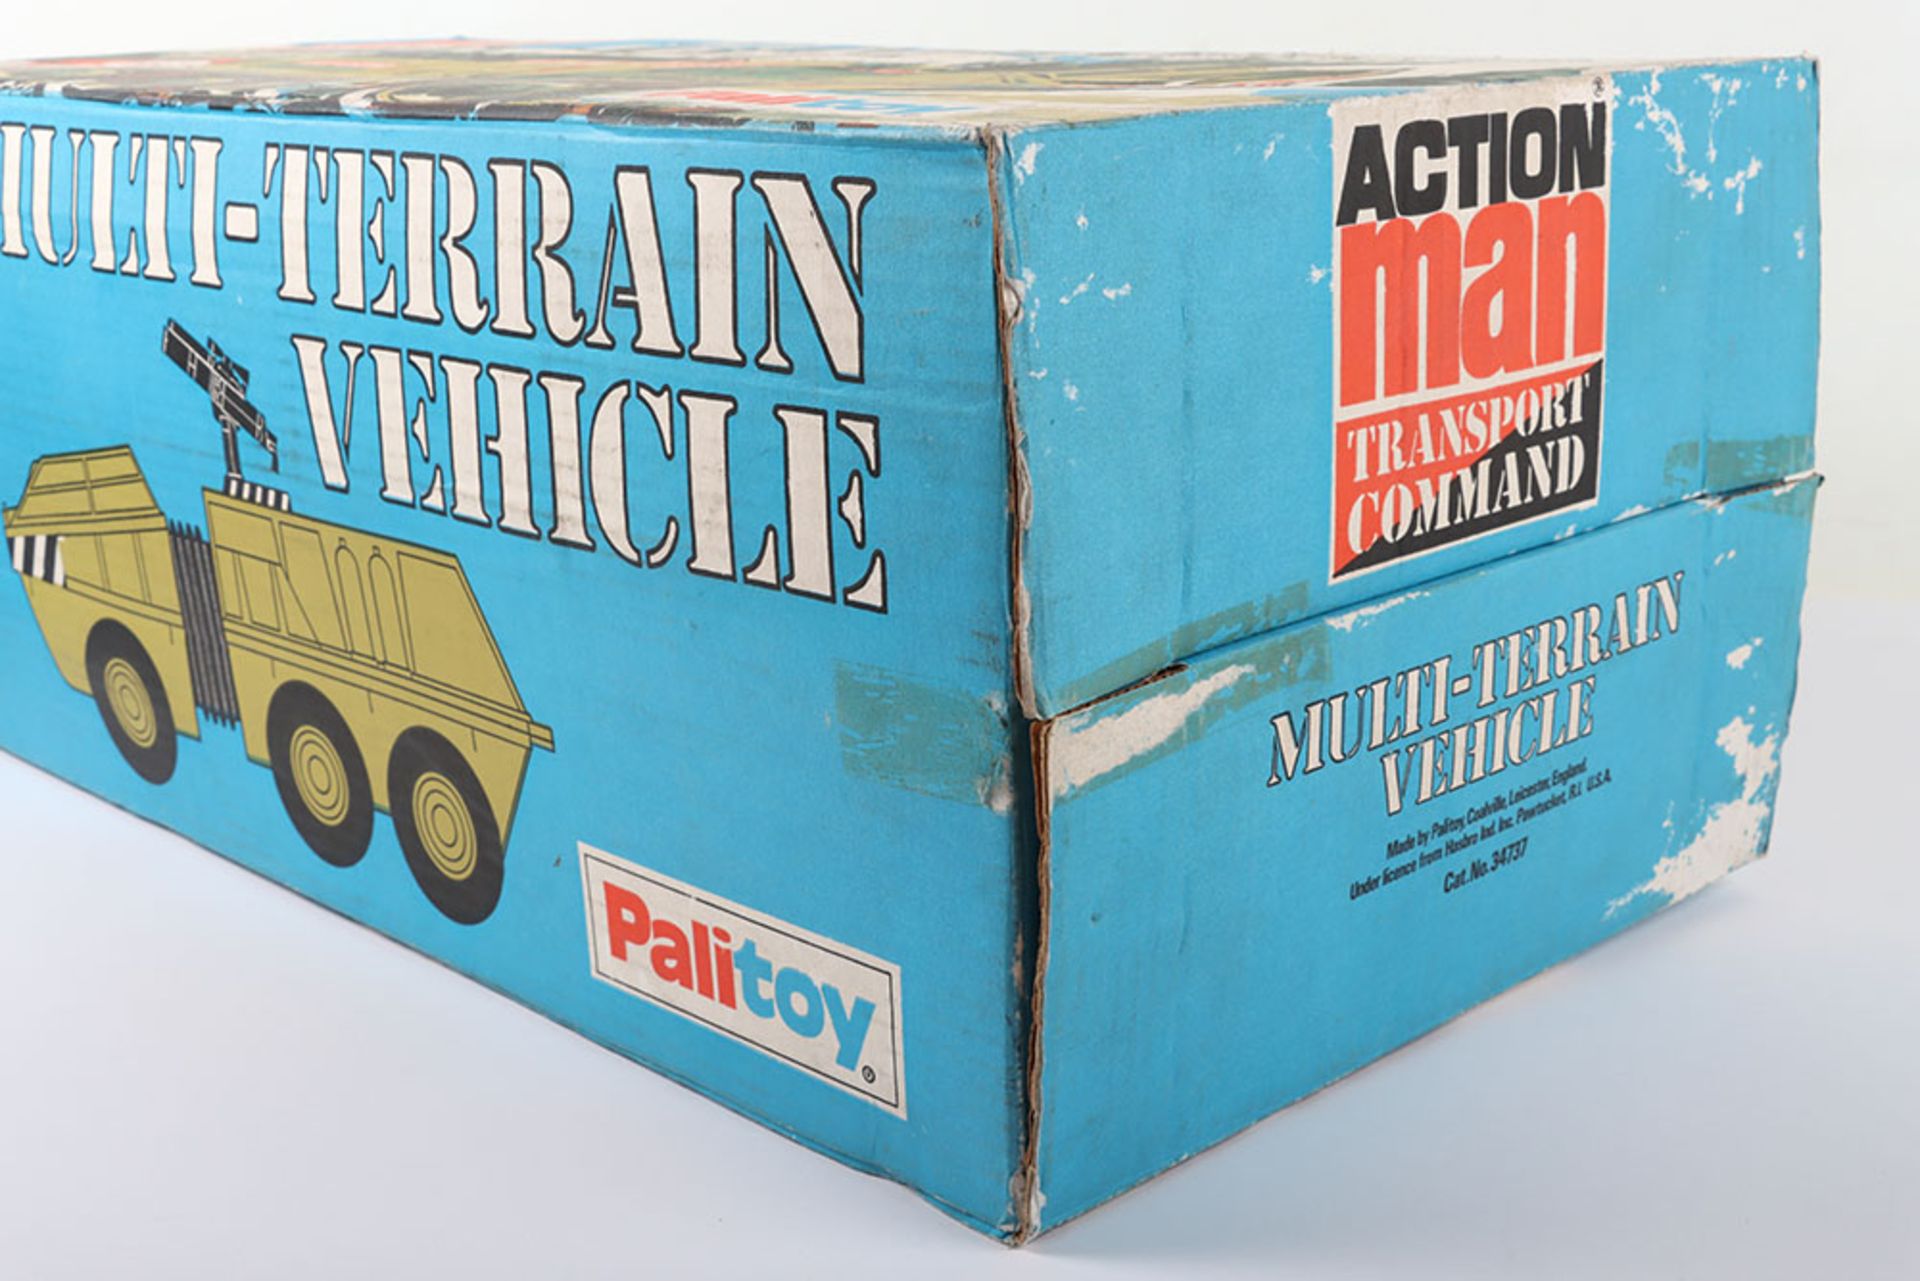 Palitoy Action Man Transport Command Multi-Terrain Vehicle - Image 8 of 8